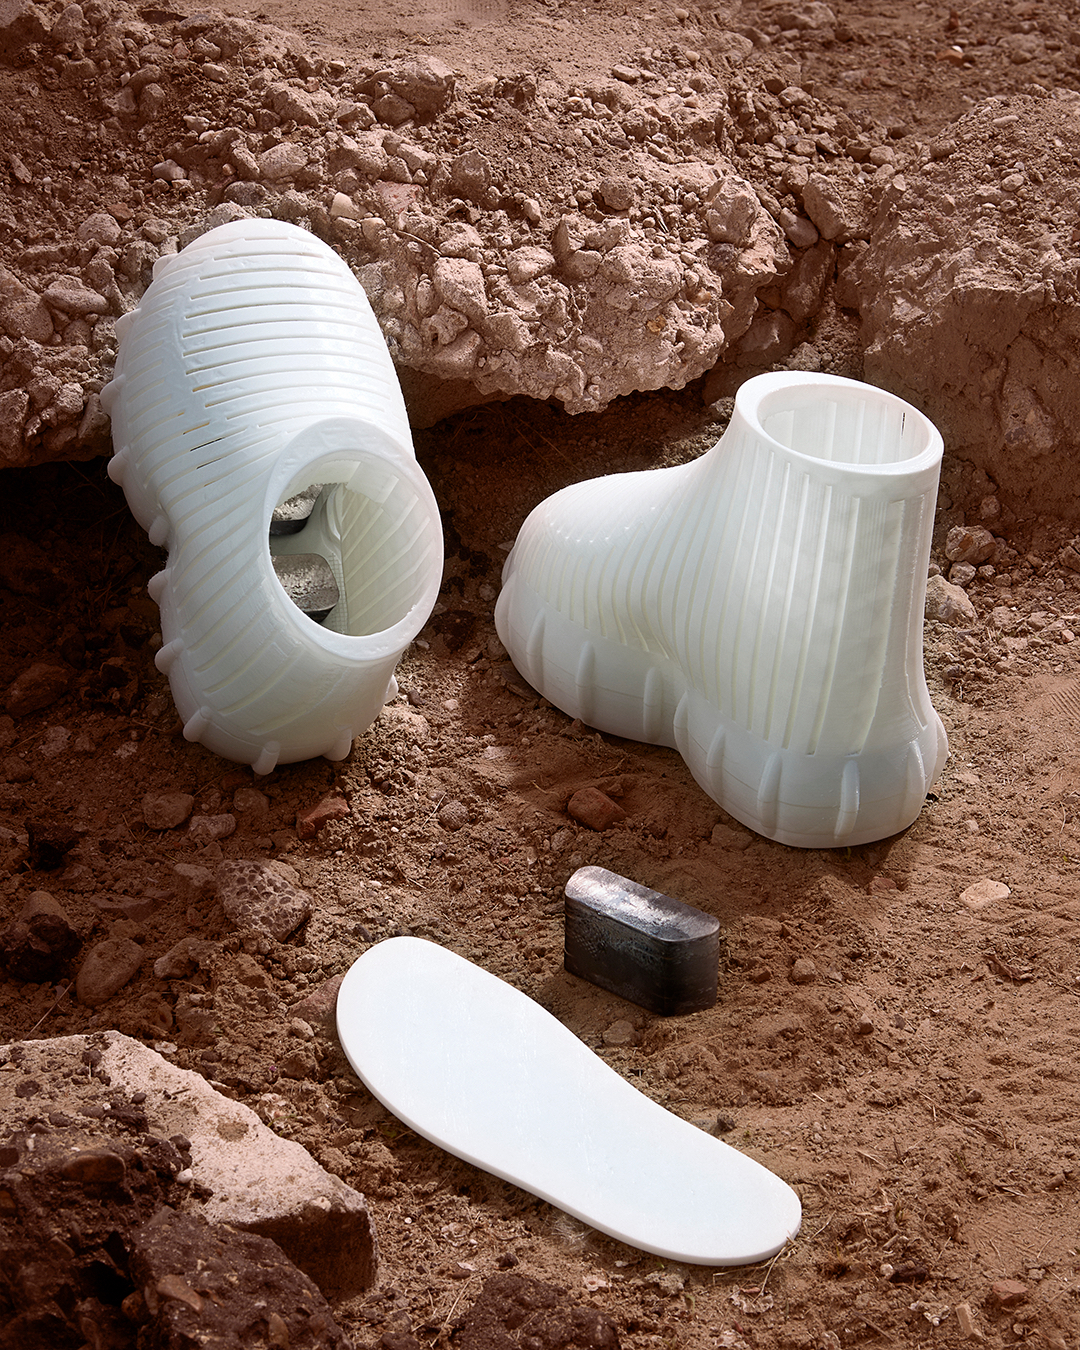 Futuristic, white running shoes standing on red, rocky soil. Palm sized blocks of metal can be seen on the inside of the left shoe. A block of metal and the white inner sole of the left shoe are laying on the ground.